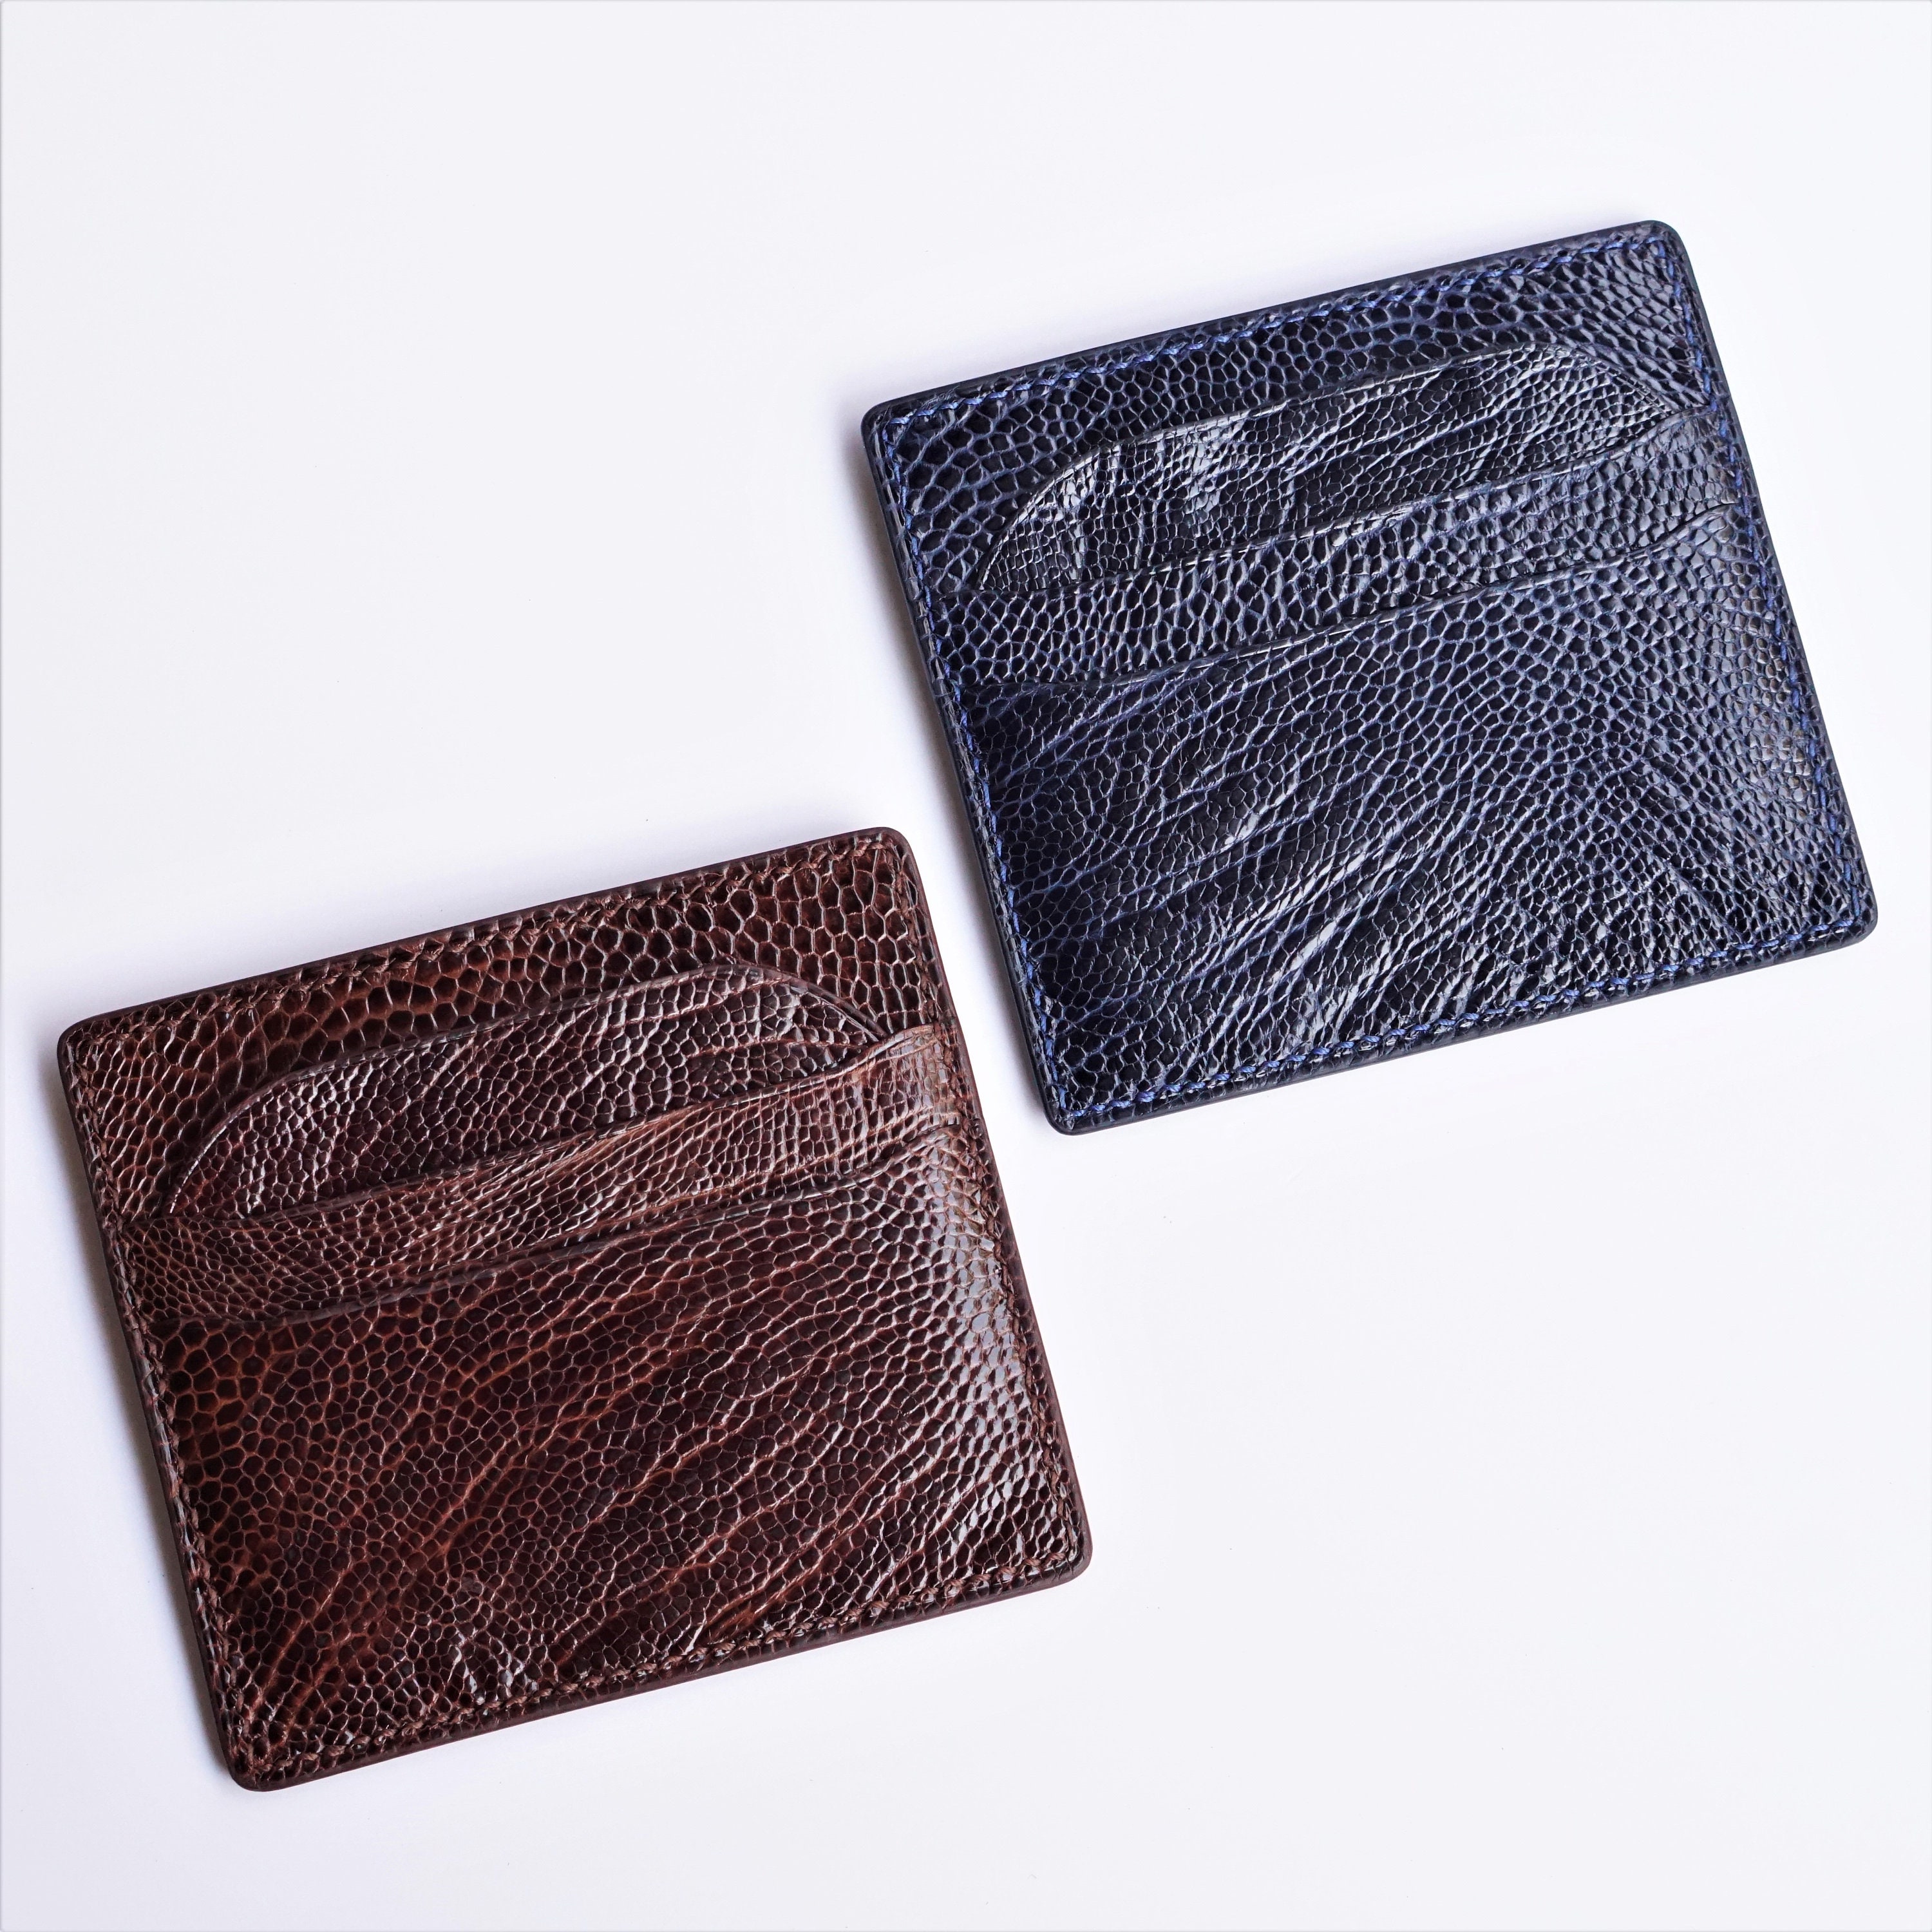 New Ostrich Print Men Wallet PU Leather Male Hand Bag Big Coin Purse Money  Credit Card Holders Luxury Men's Clutch Purses Christmas Gift For Men